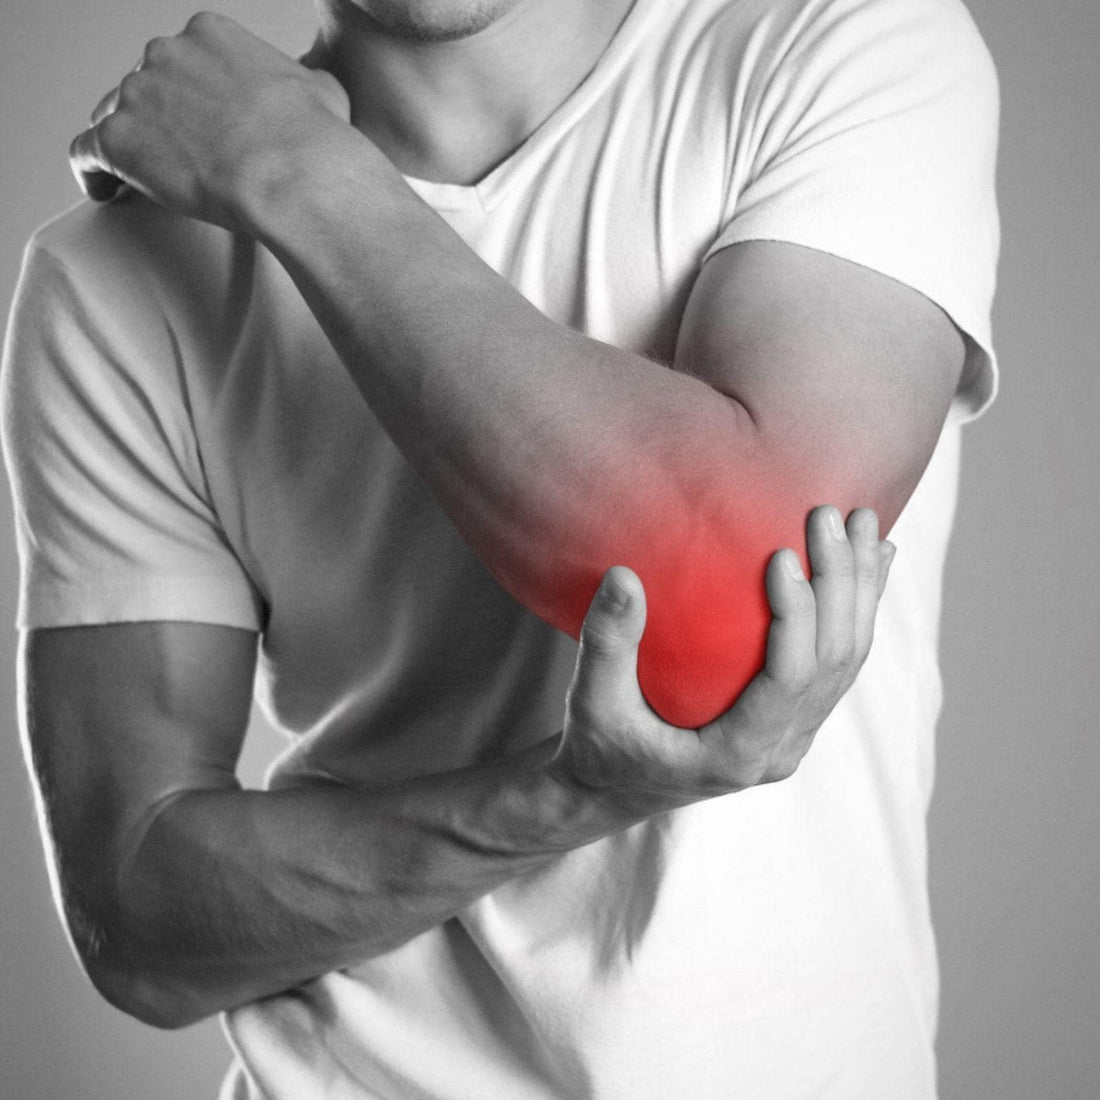 What's Tennis Elbow and How to Recover image of pained elbow